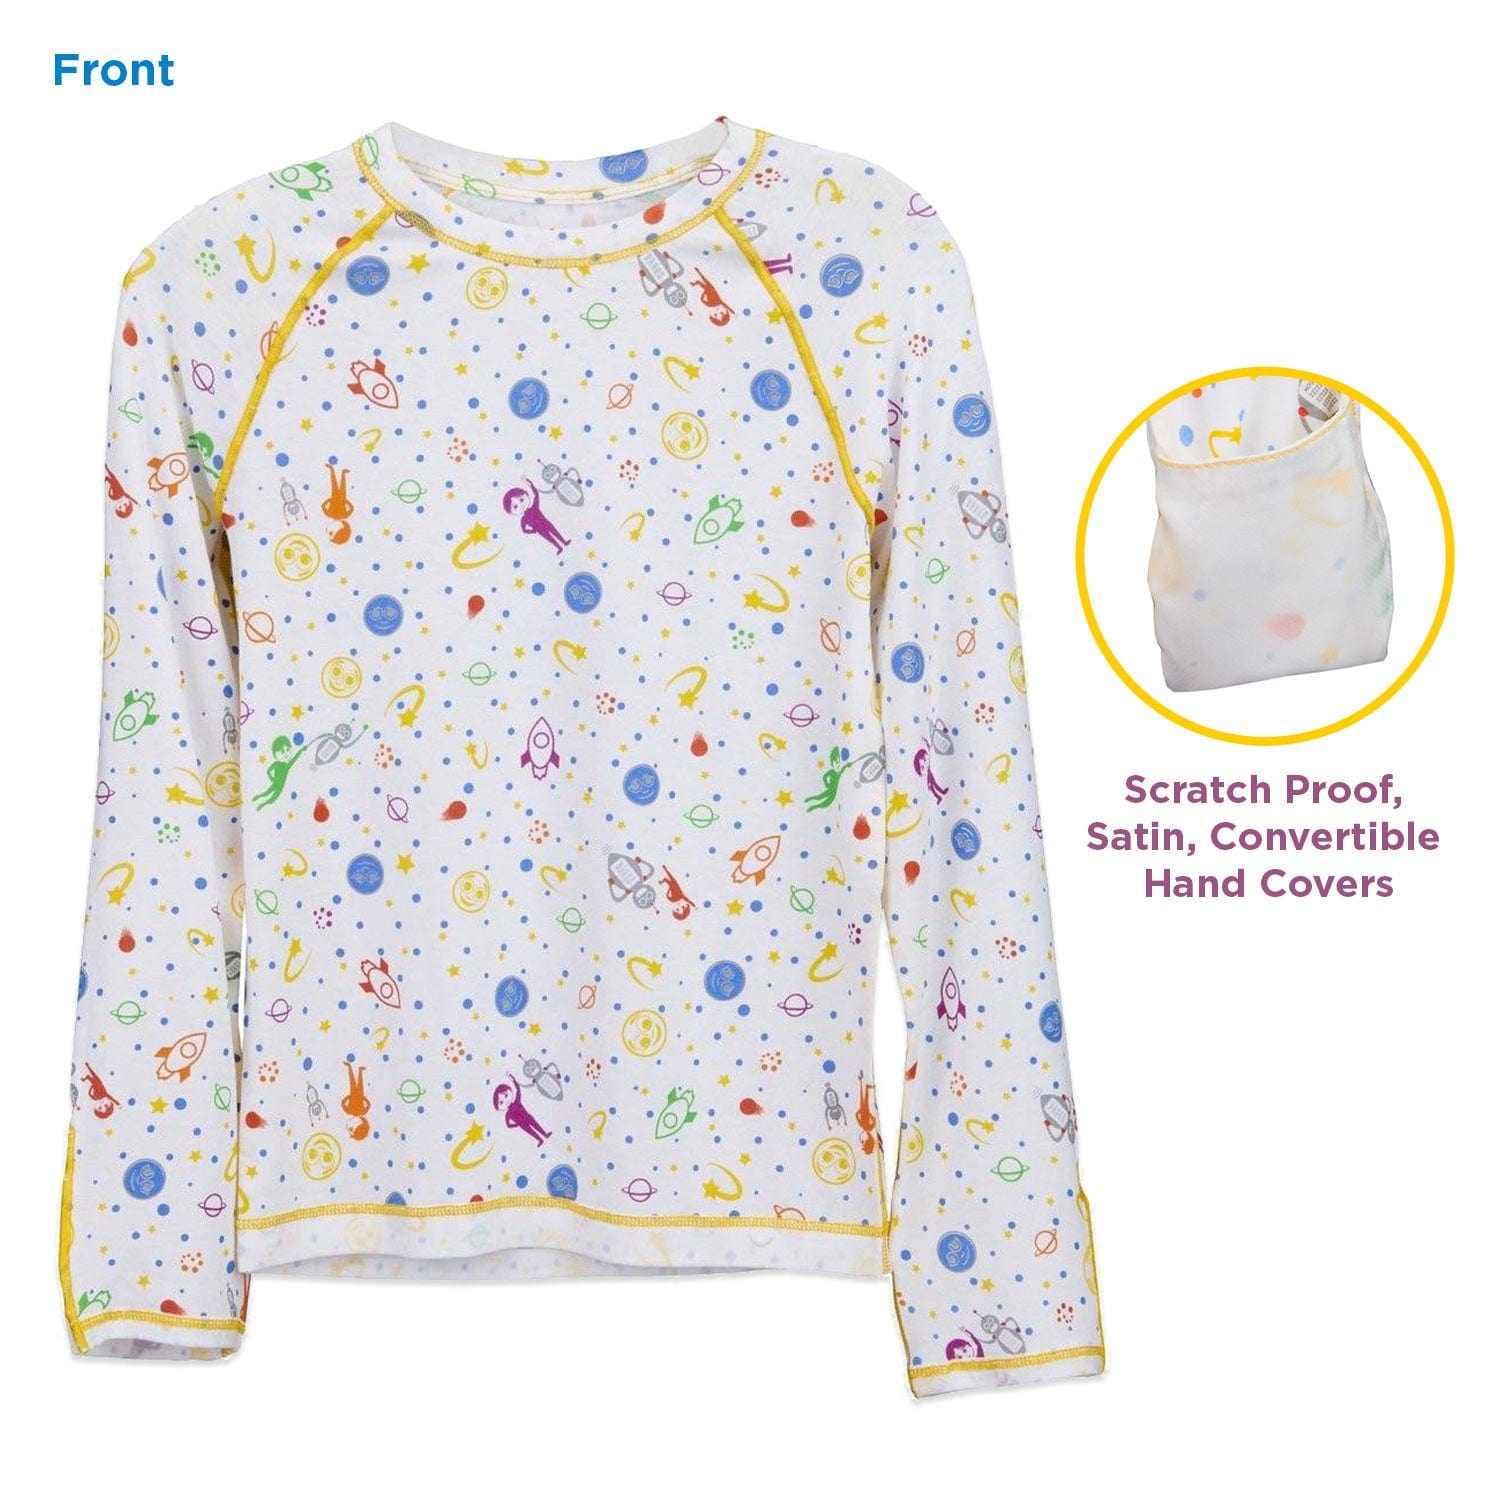 Atopic Dermatitis Sleepwear for children Stops Scratching from Eczema at Night 